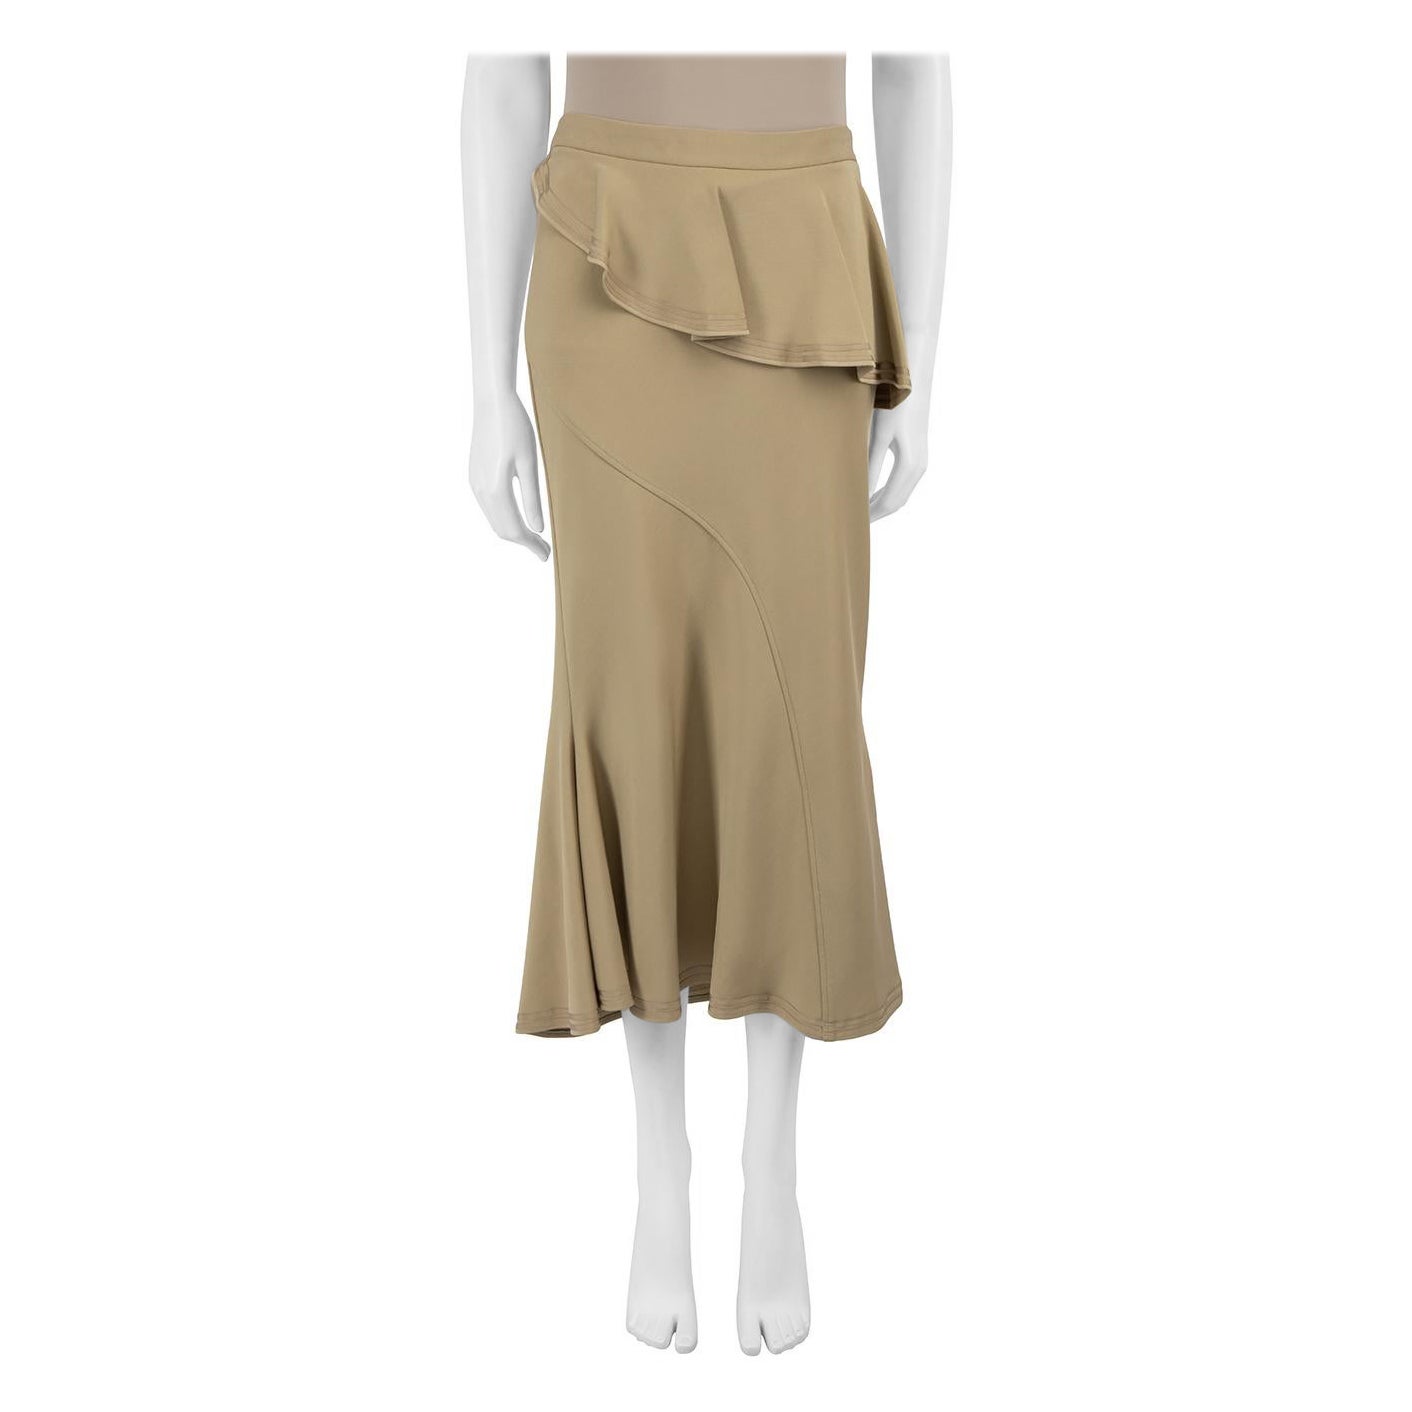 Givenchy Beige Peplum Ruffle Accent Midi Skirt Size L For Sale